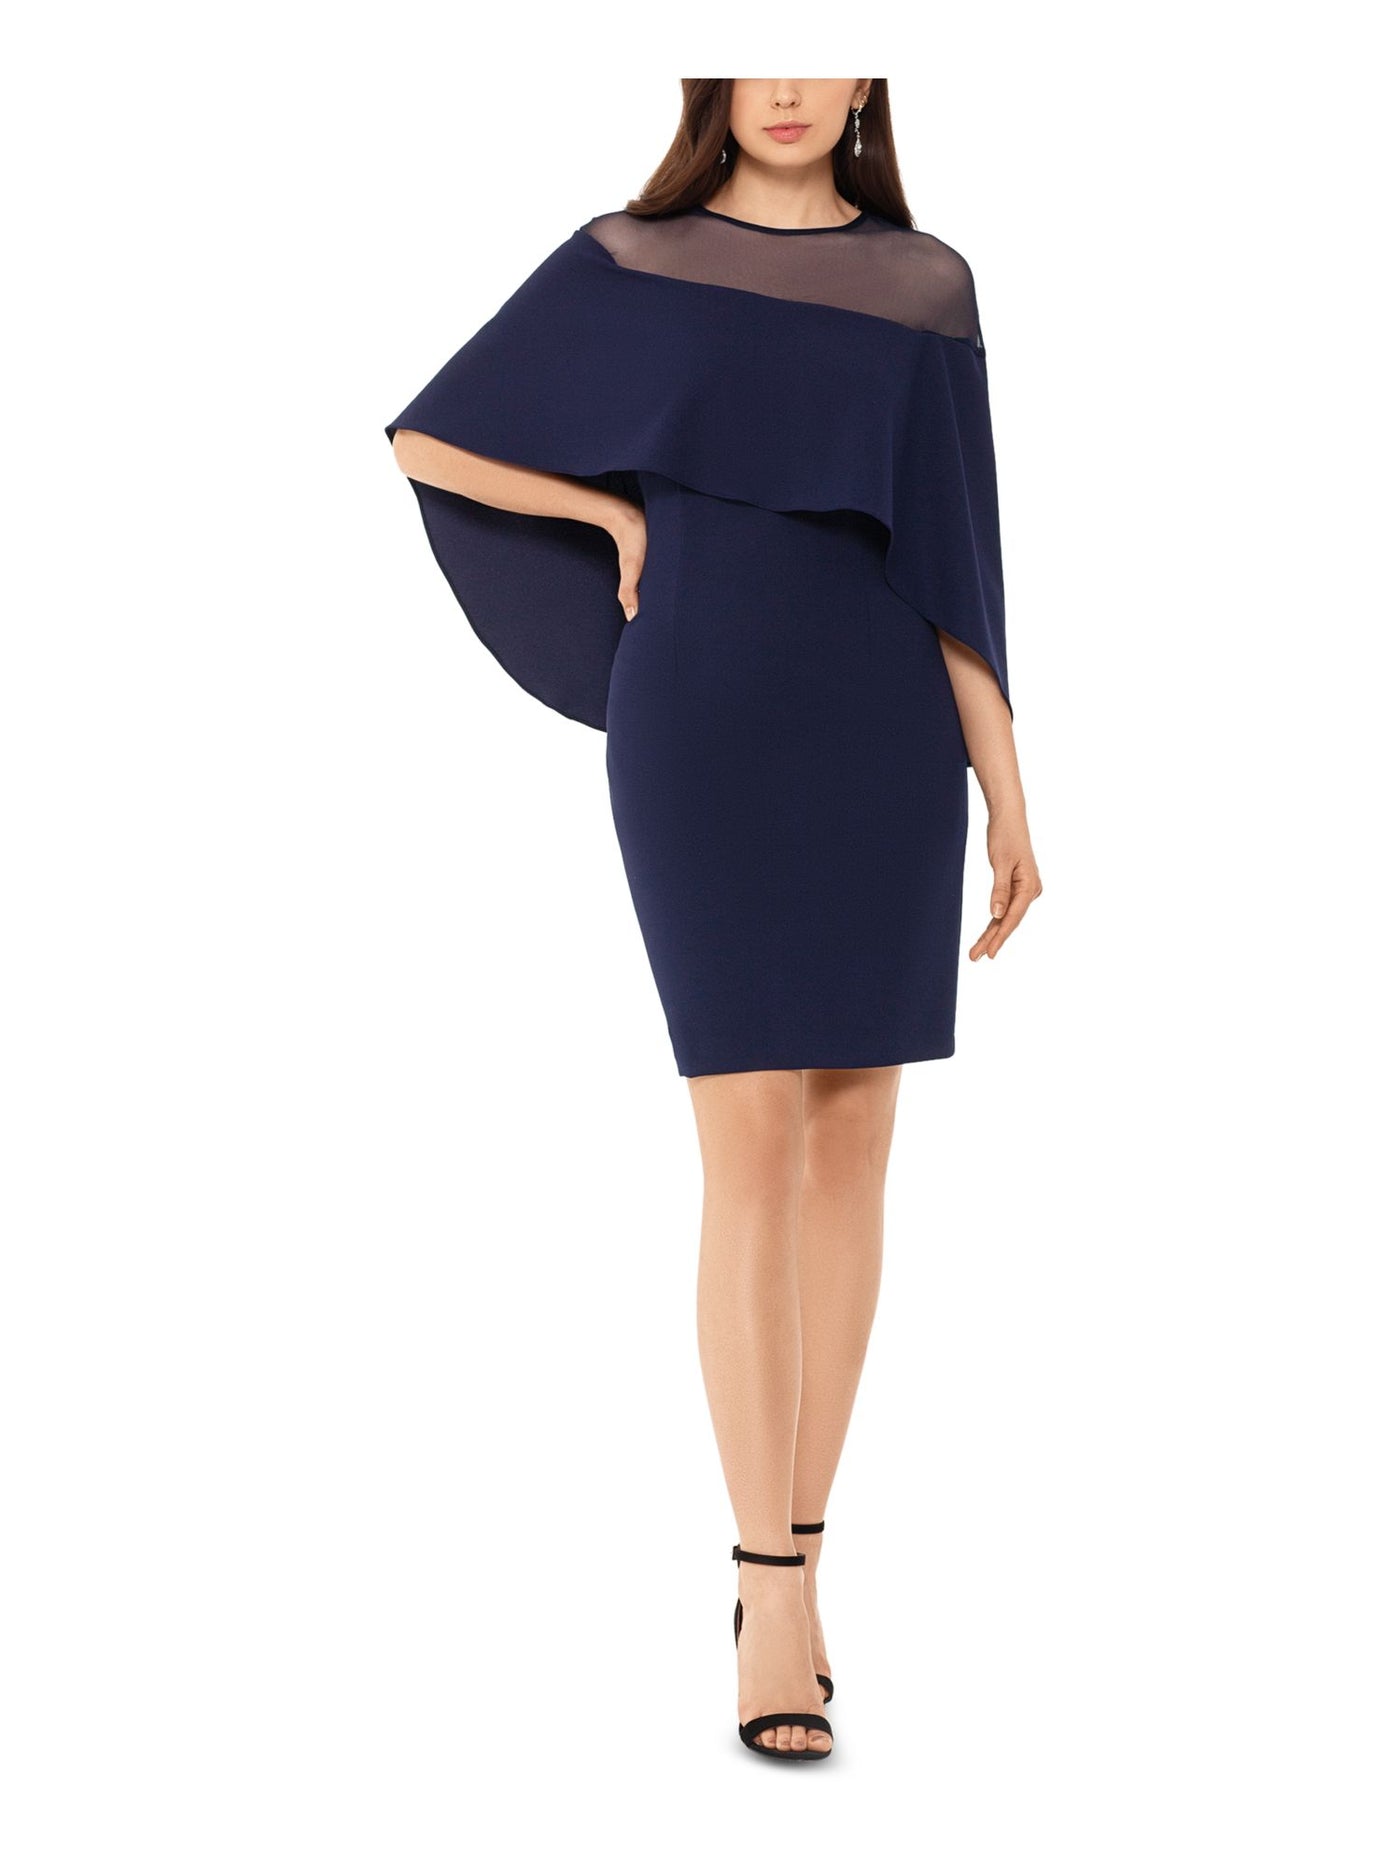 BETSY & ADAM Womens Navy Zippered Overlay Sleeves Illusion Neckline Above The Knee Evening Body Con Dress 4